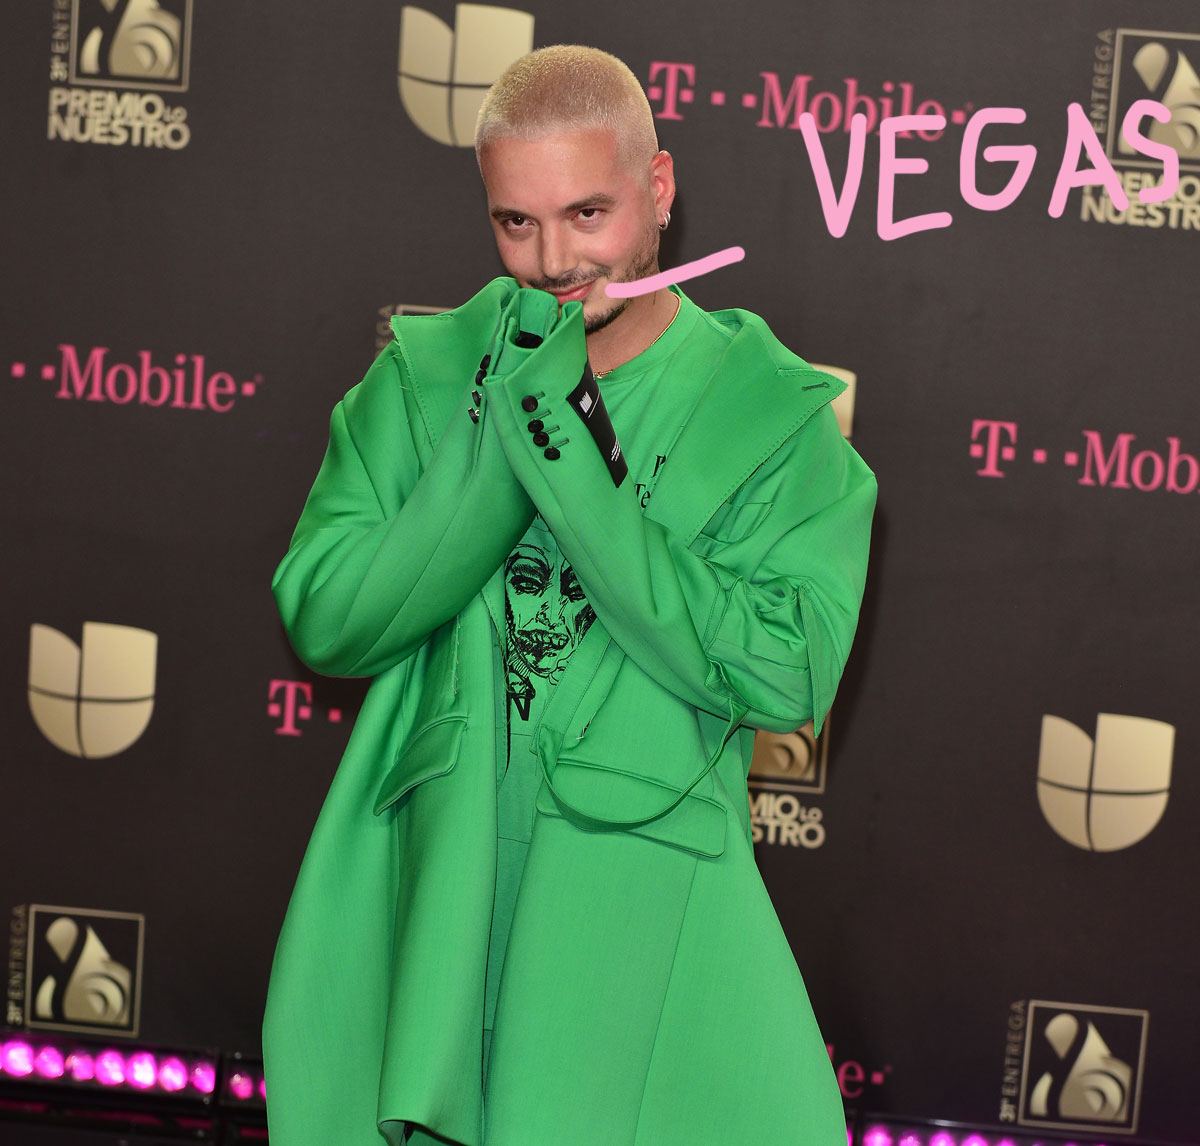 J Balvin Takes The Statement Skirt To The Next Level At The Louis